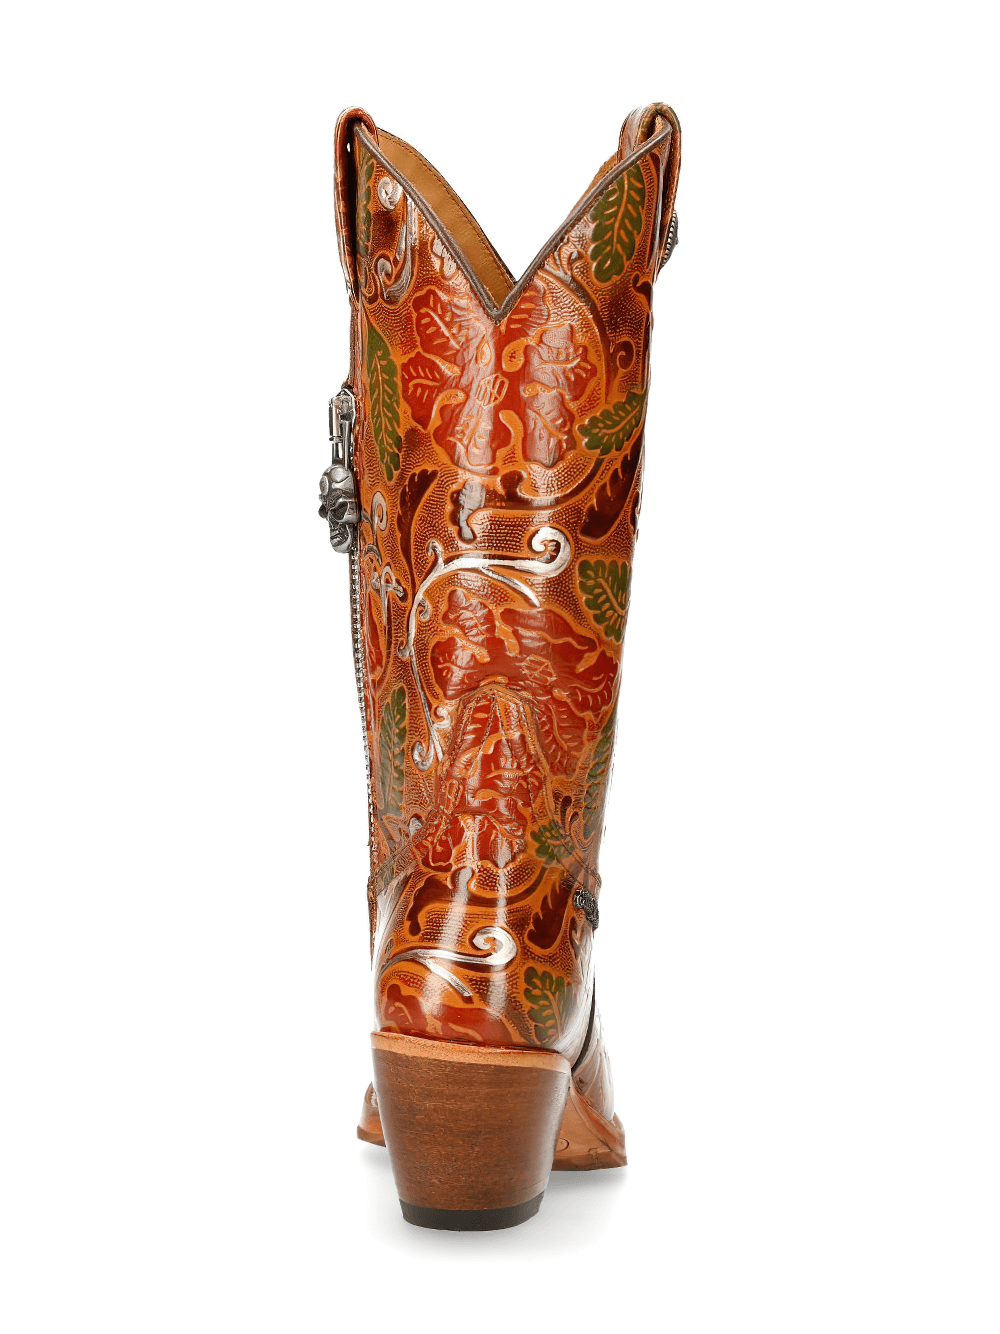 NEW ROCK Exquisite Western-Inspired Tall Leather Boots